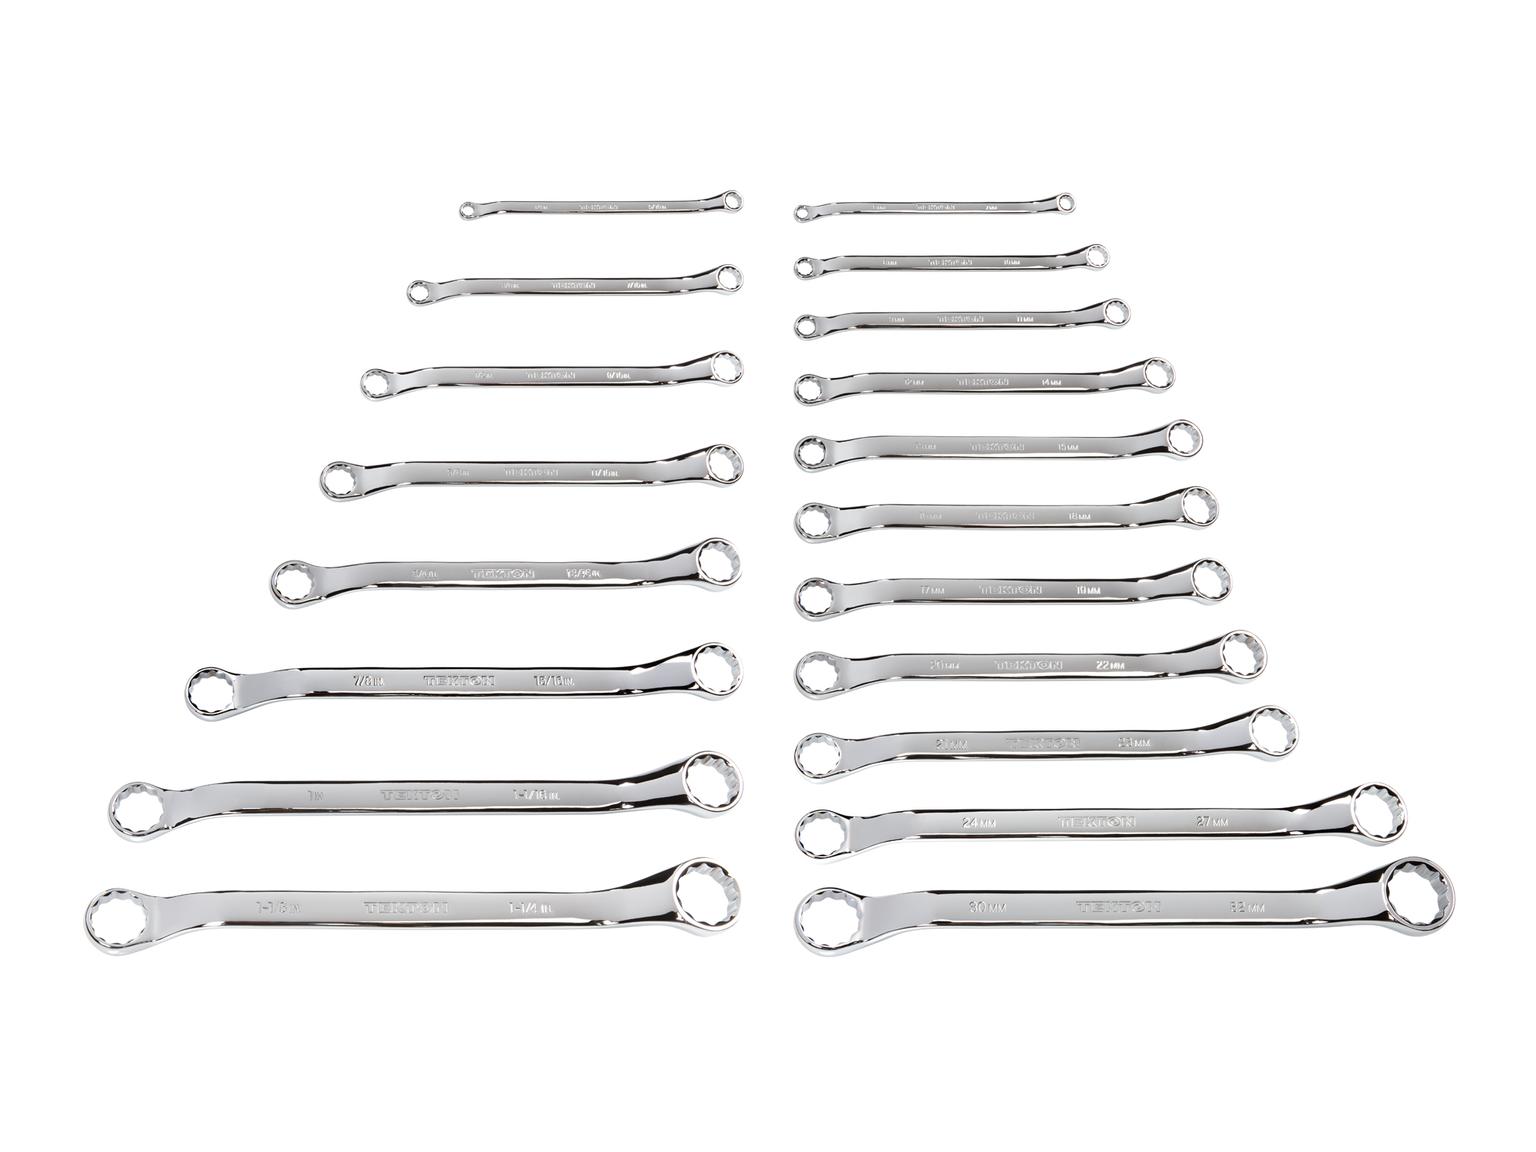 TEKTON WBE90302-T 45-Degree Offset Box End Wrench Set, 19-Piece (1/4 - 1-1/4 in., 6 - 32 mm)